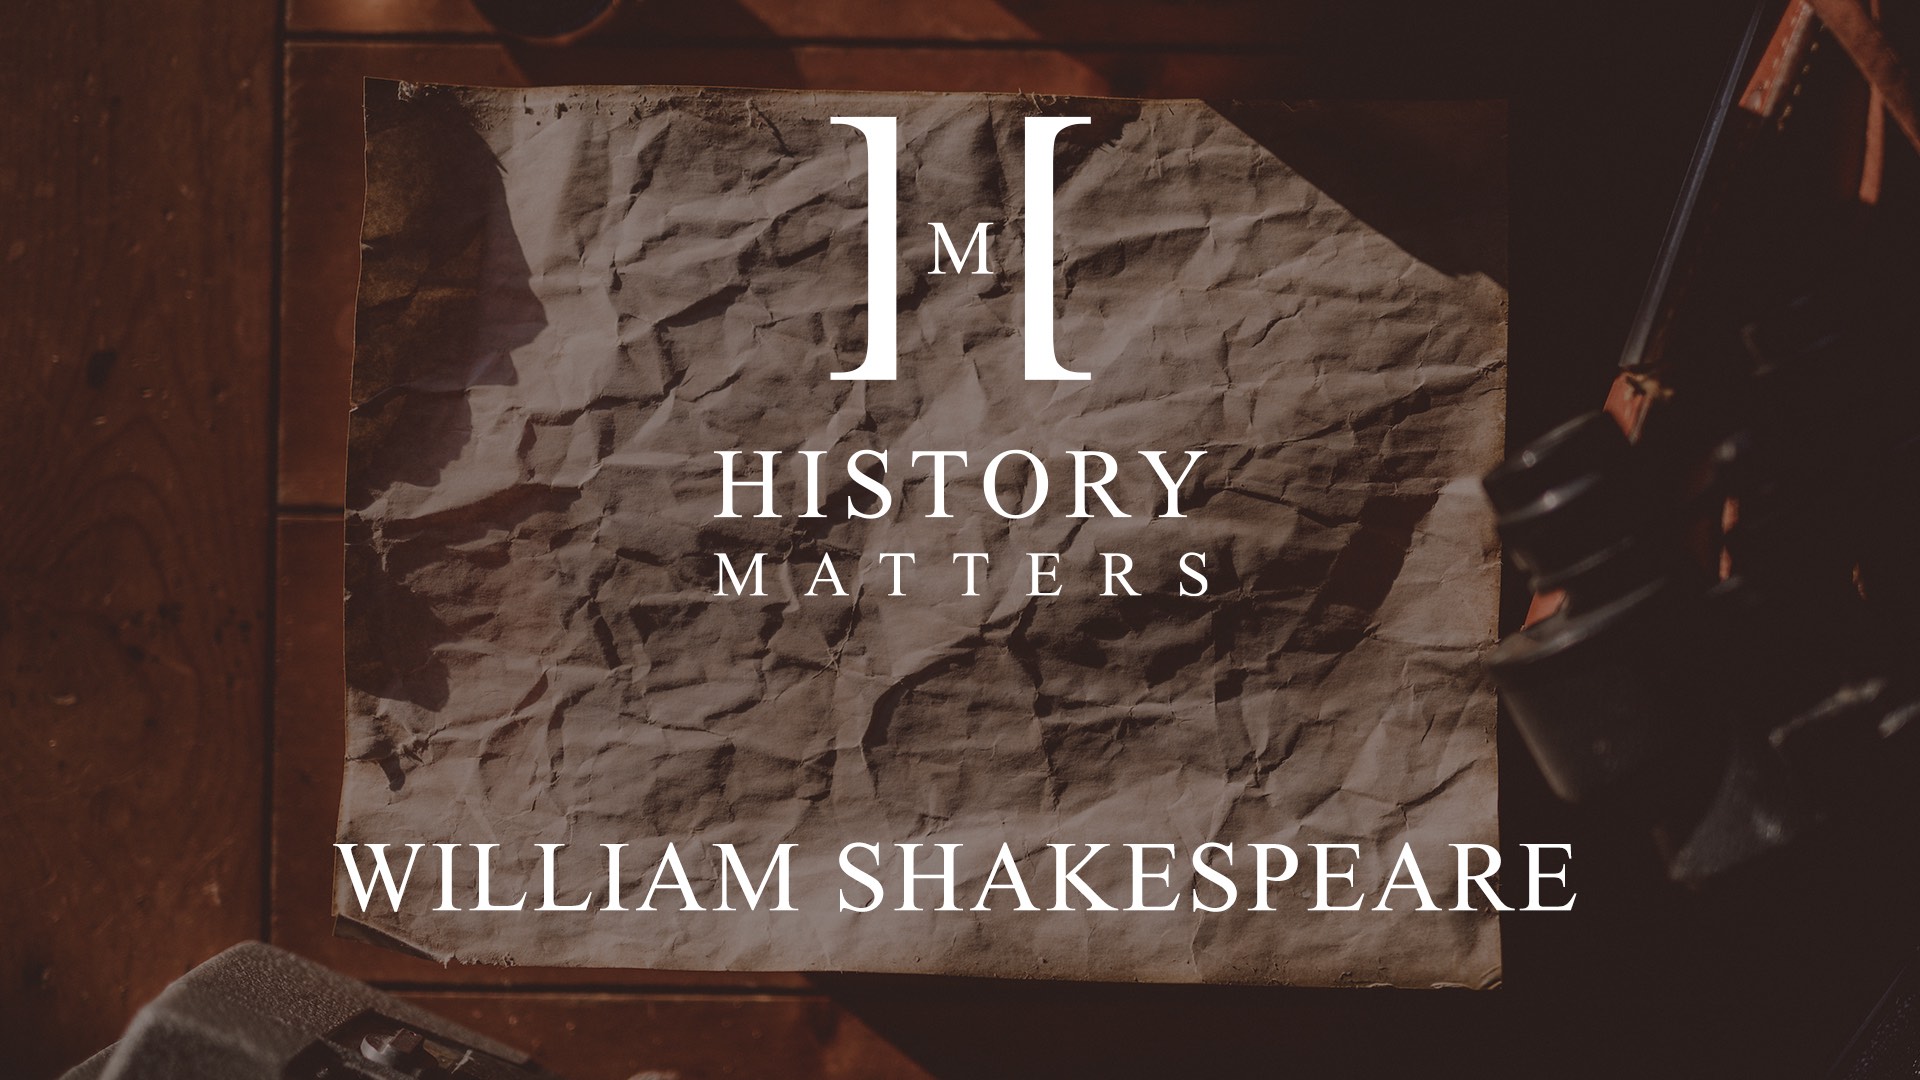 White HM William Shakespeare logo with background showing crumpled paper and binoculars on display